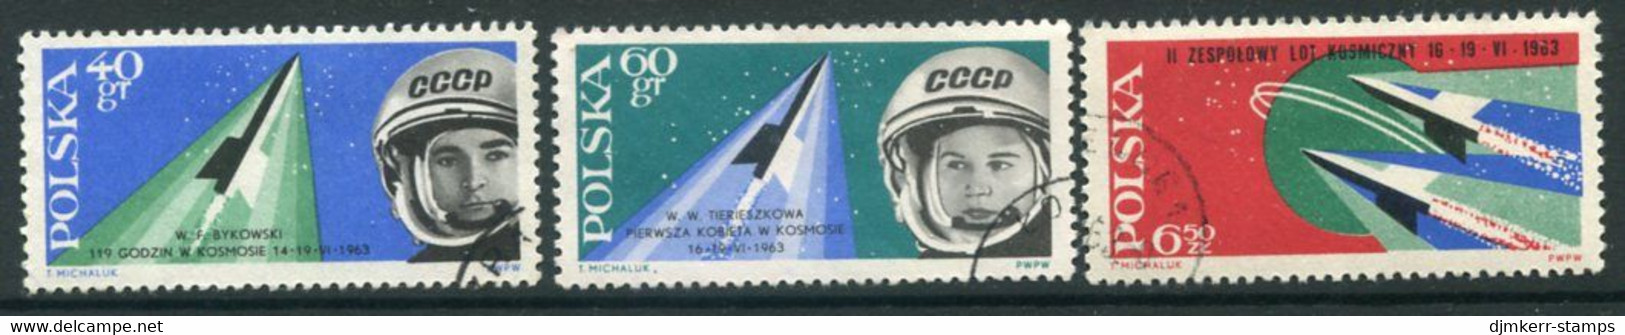 POLAND 1963 Vostok 5 Space Flight  Used.   Michel 1415-17 - Used Stamps